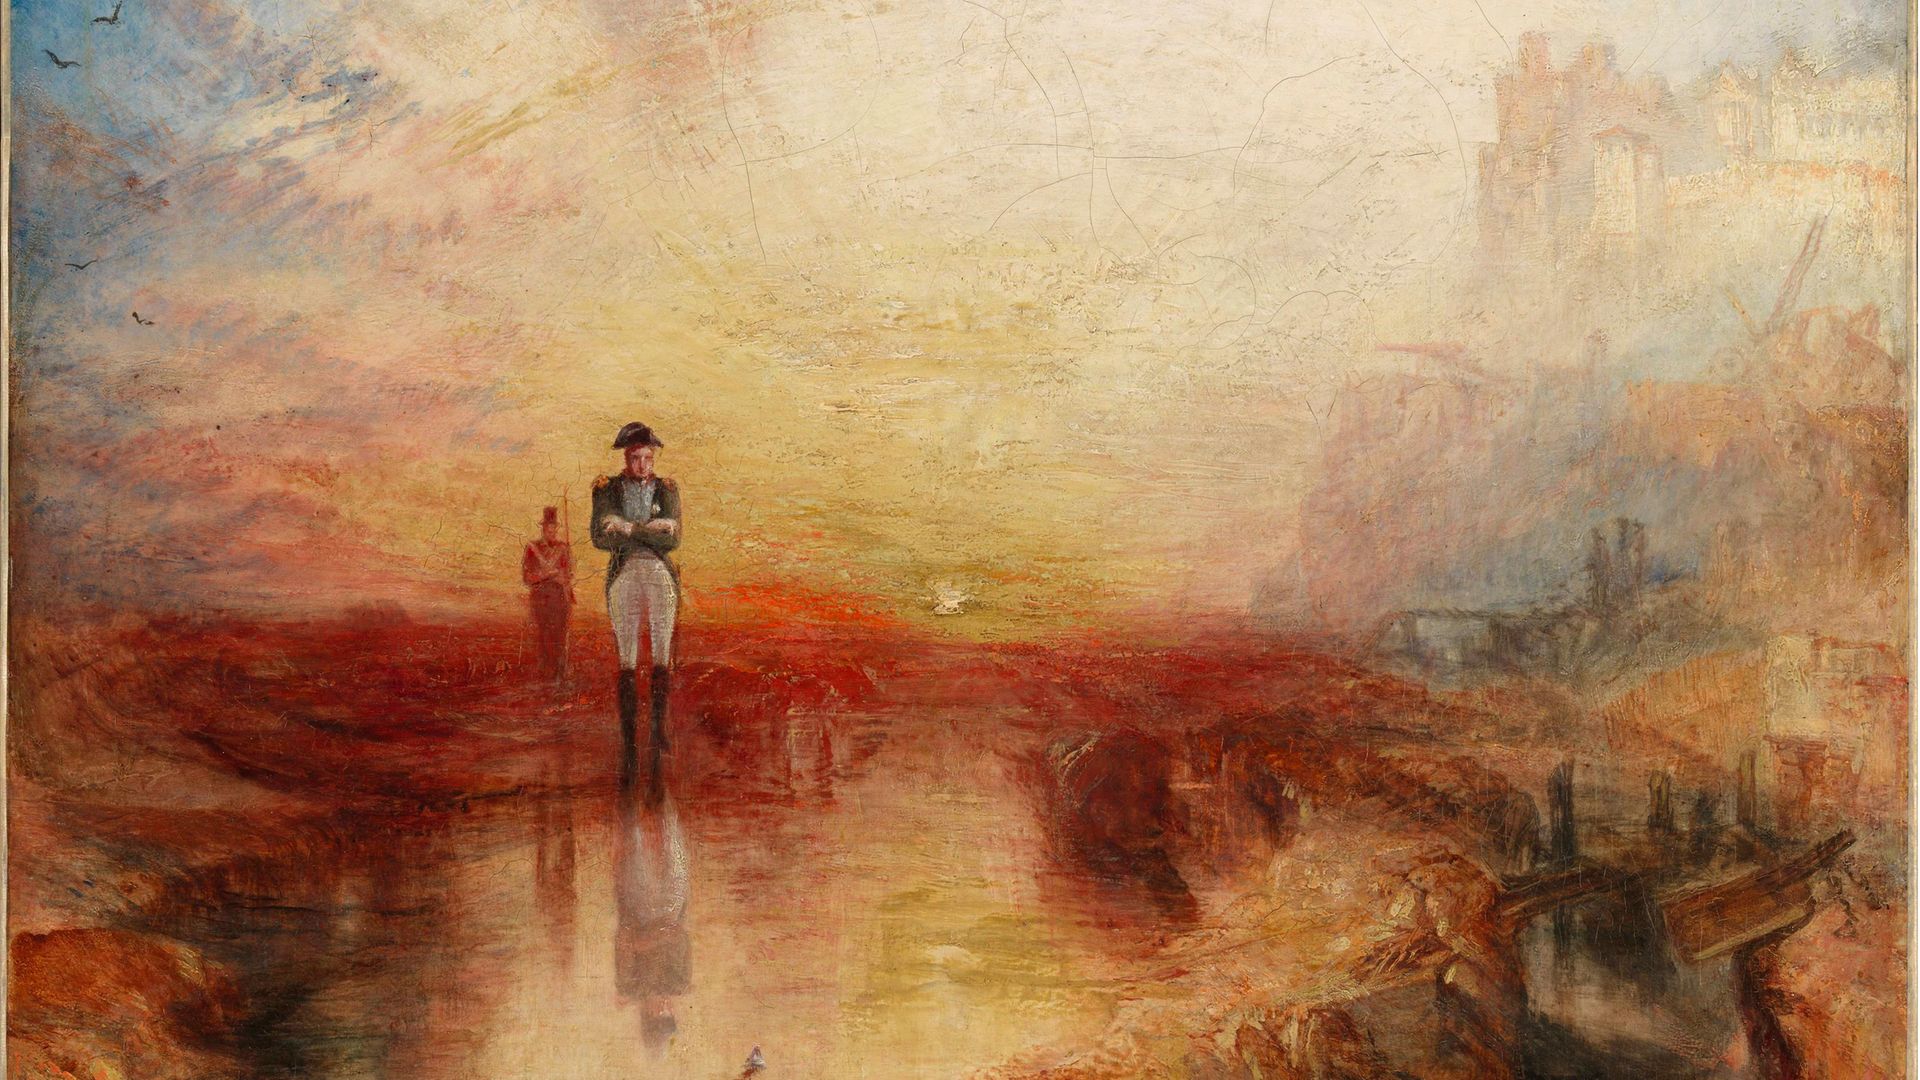 JMW Turner's new exhibition at the Tate Gallery